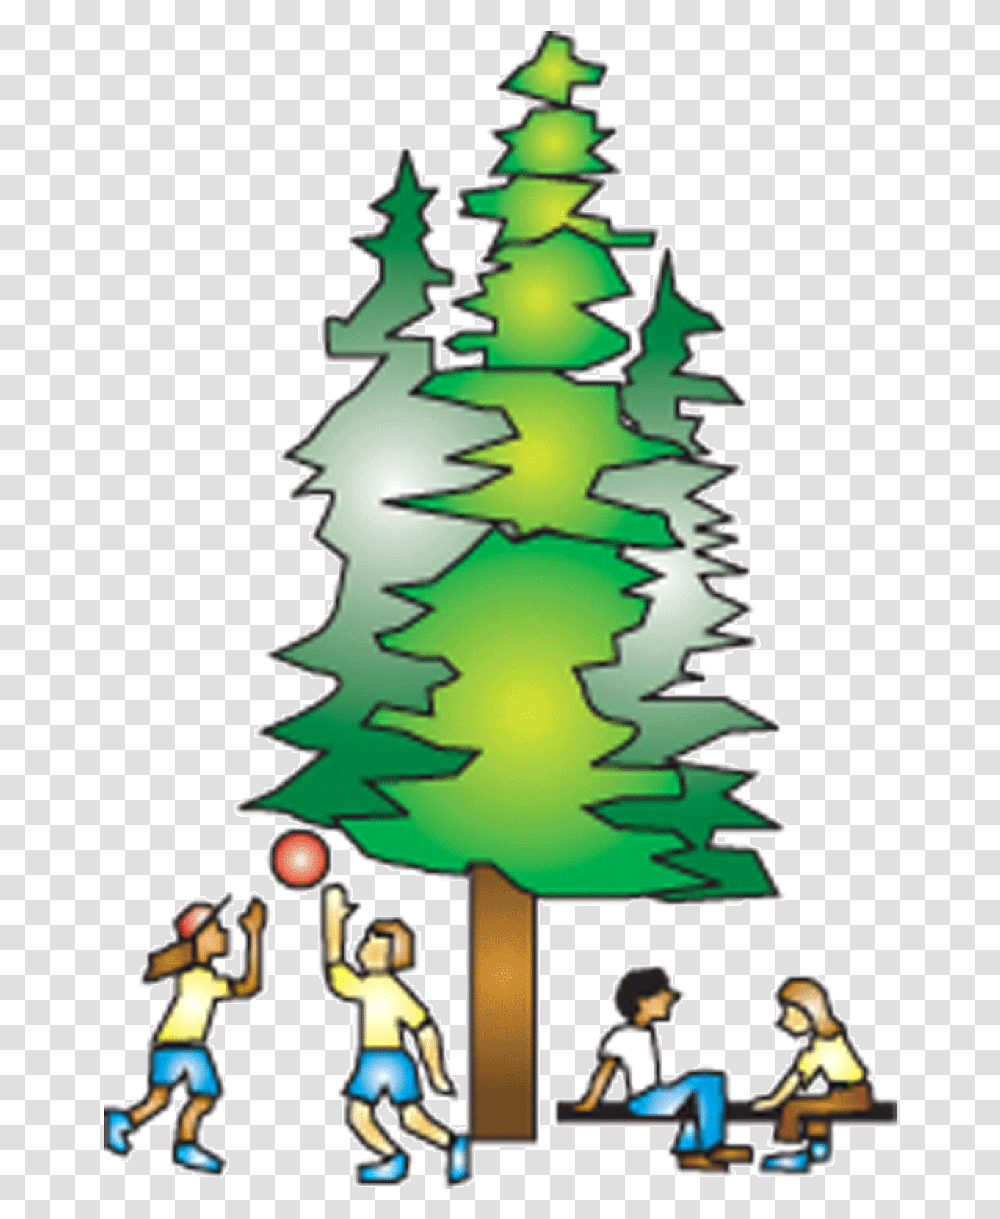 Spring 2015 Camping Uccr, Tree, Plant, Christmas Tree, Ornament Transparent Png